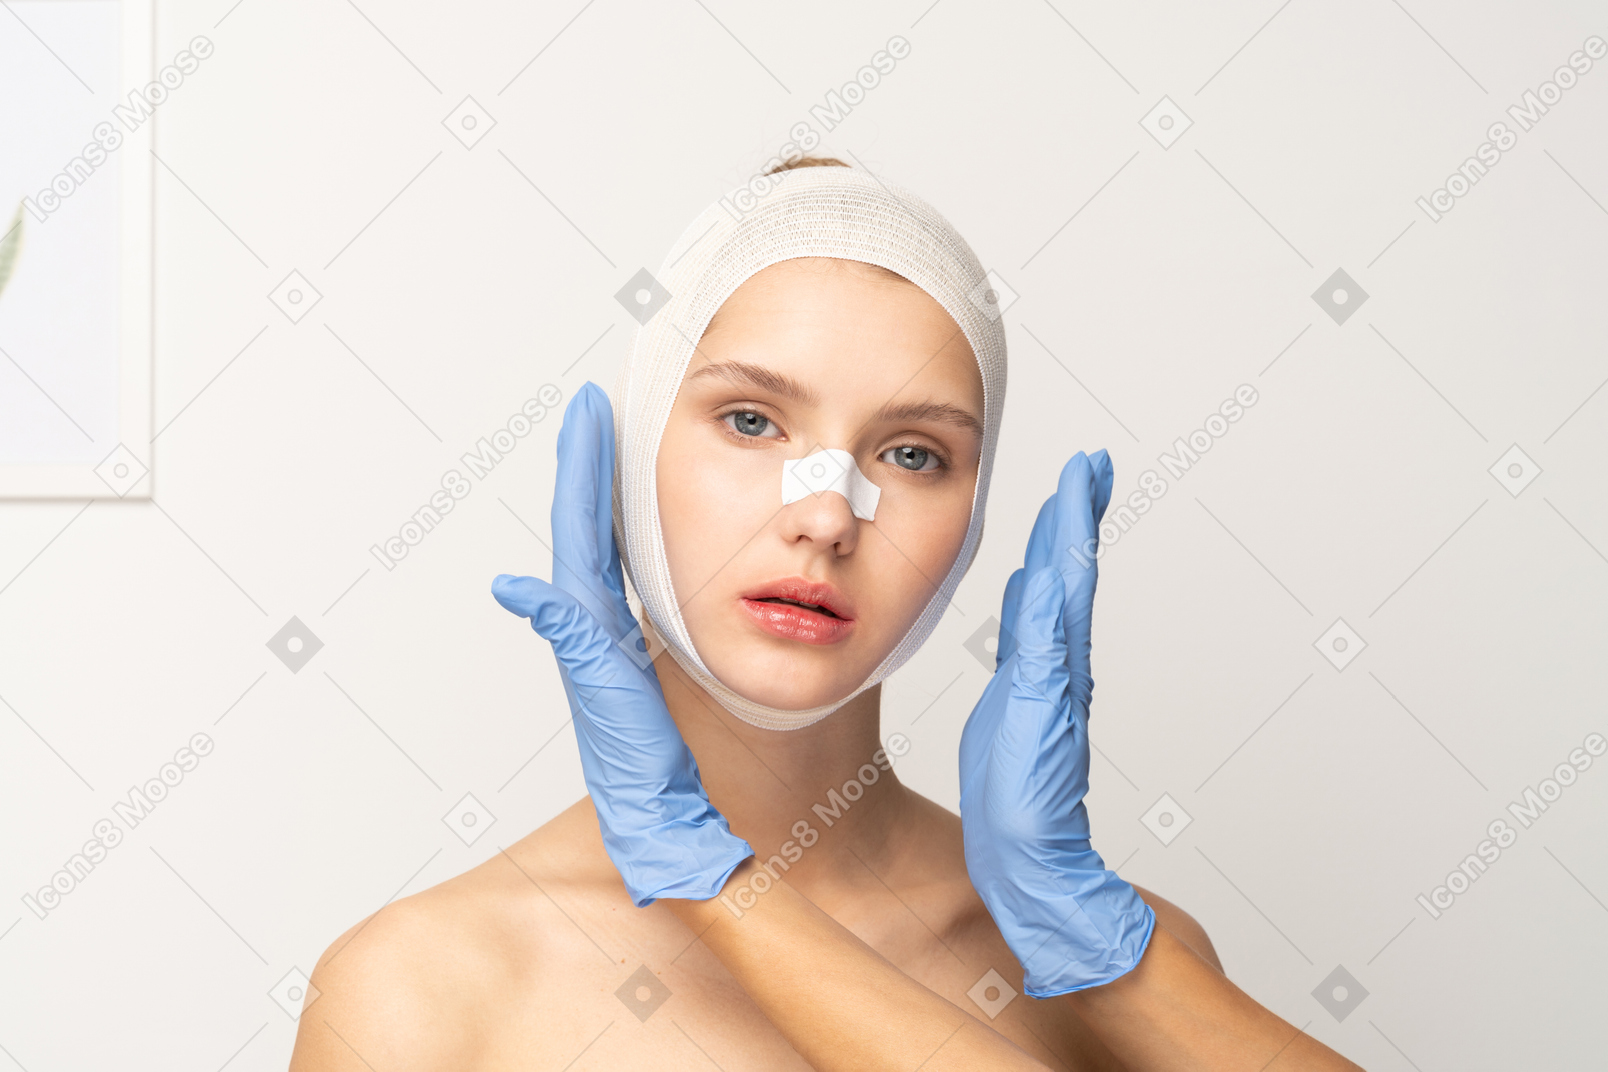 Young woman with bandaged head and hands next to her face